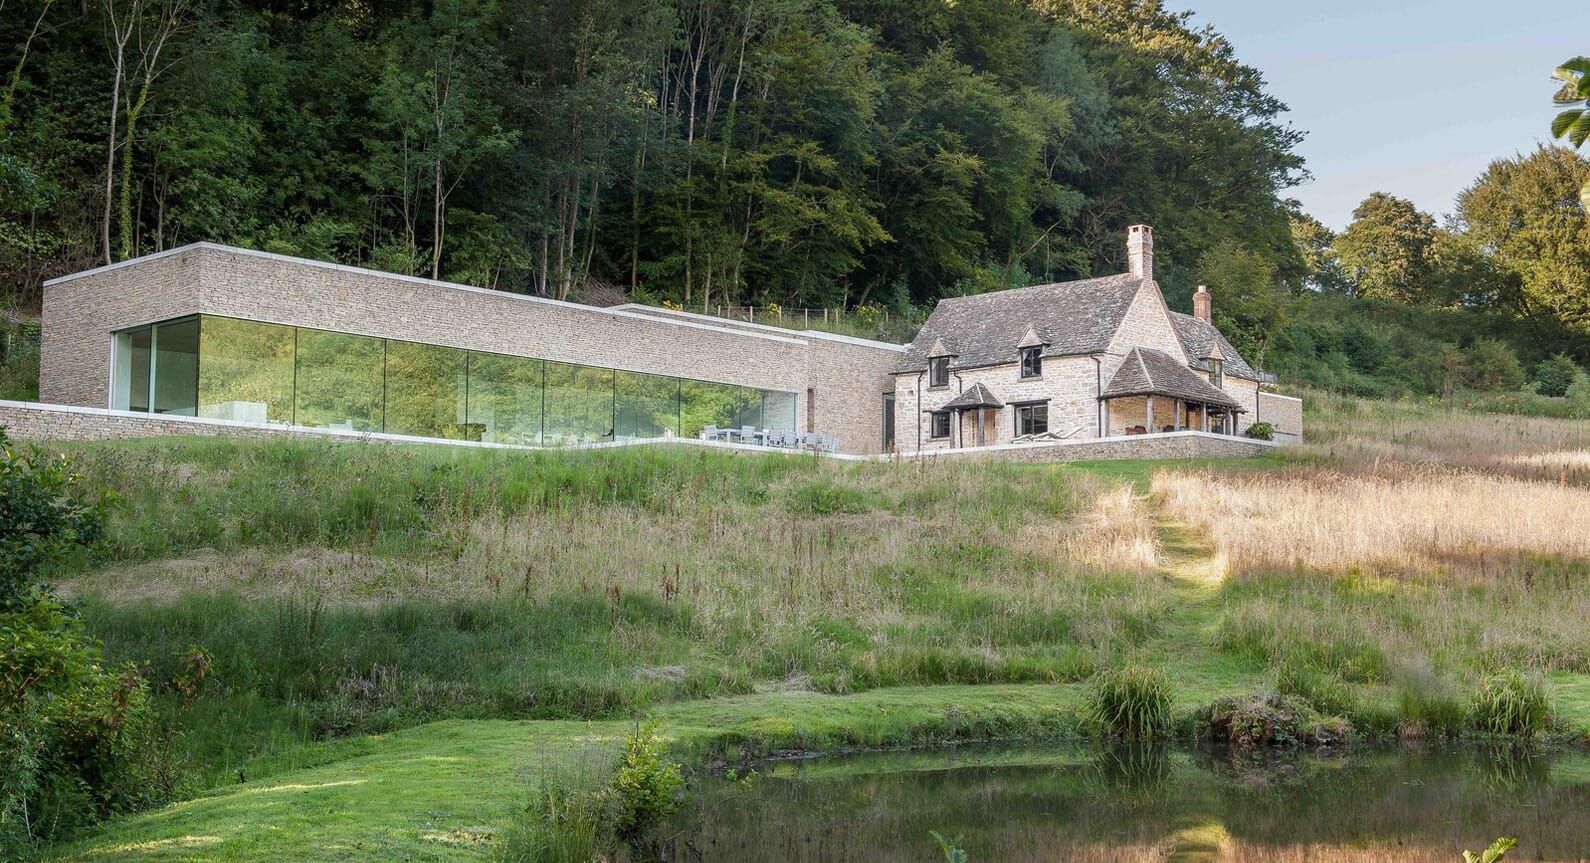 Found Associates Carves A Spectacular New Home Into The Cotswold Landscape